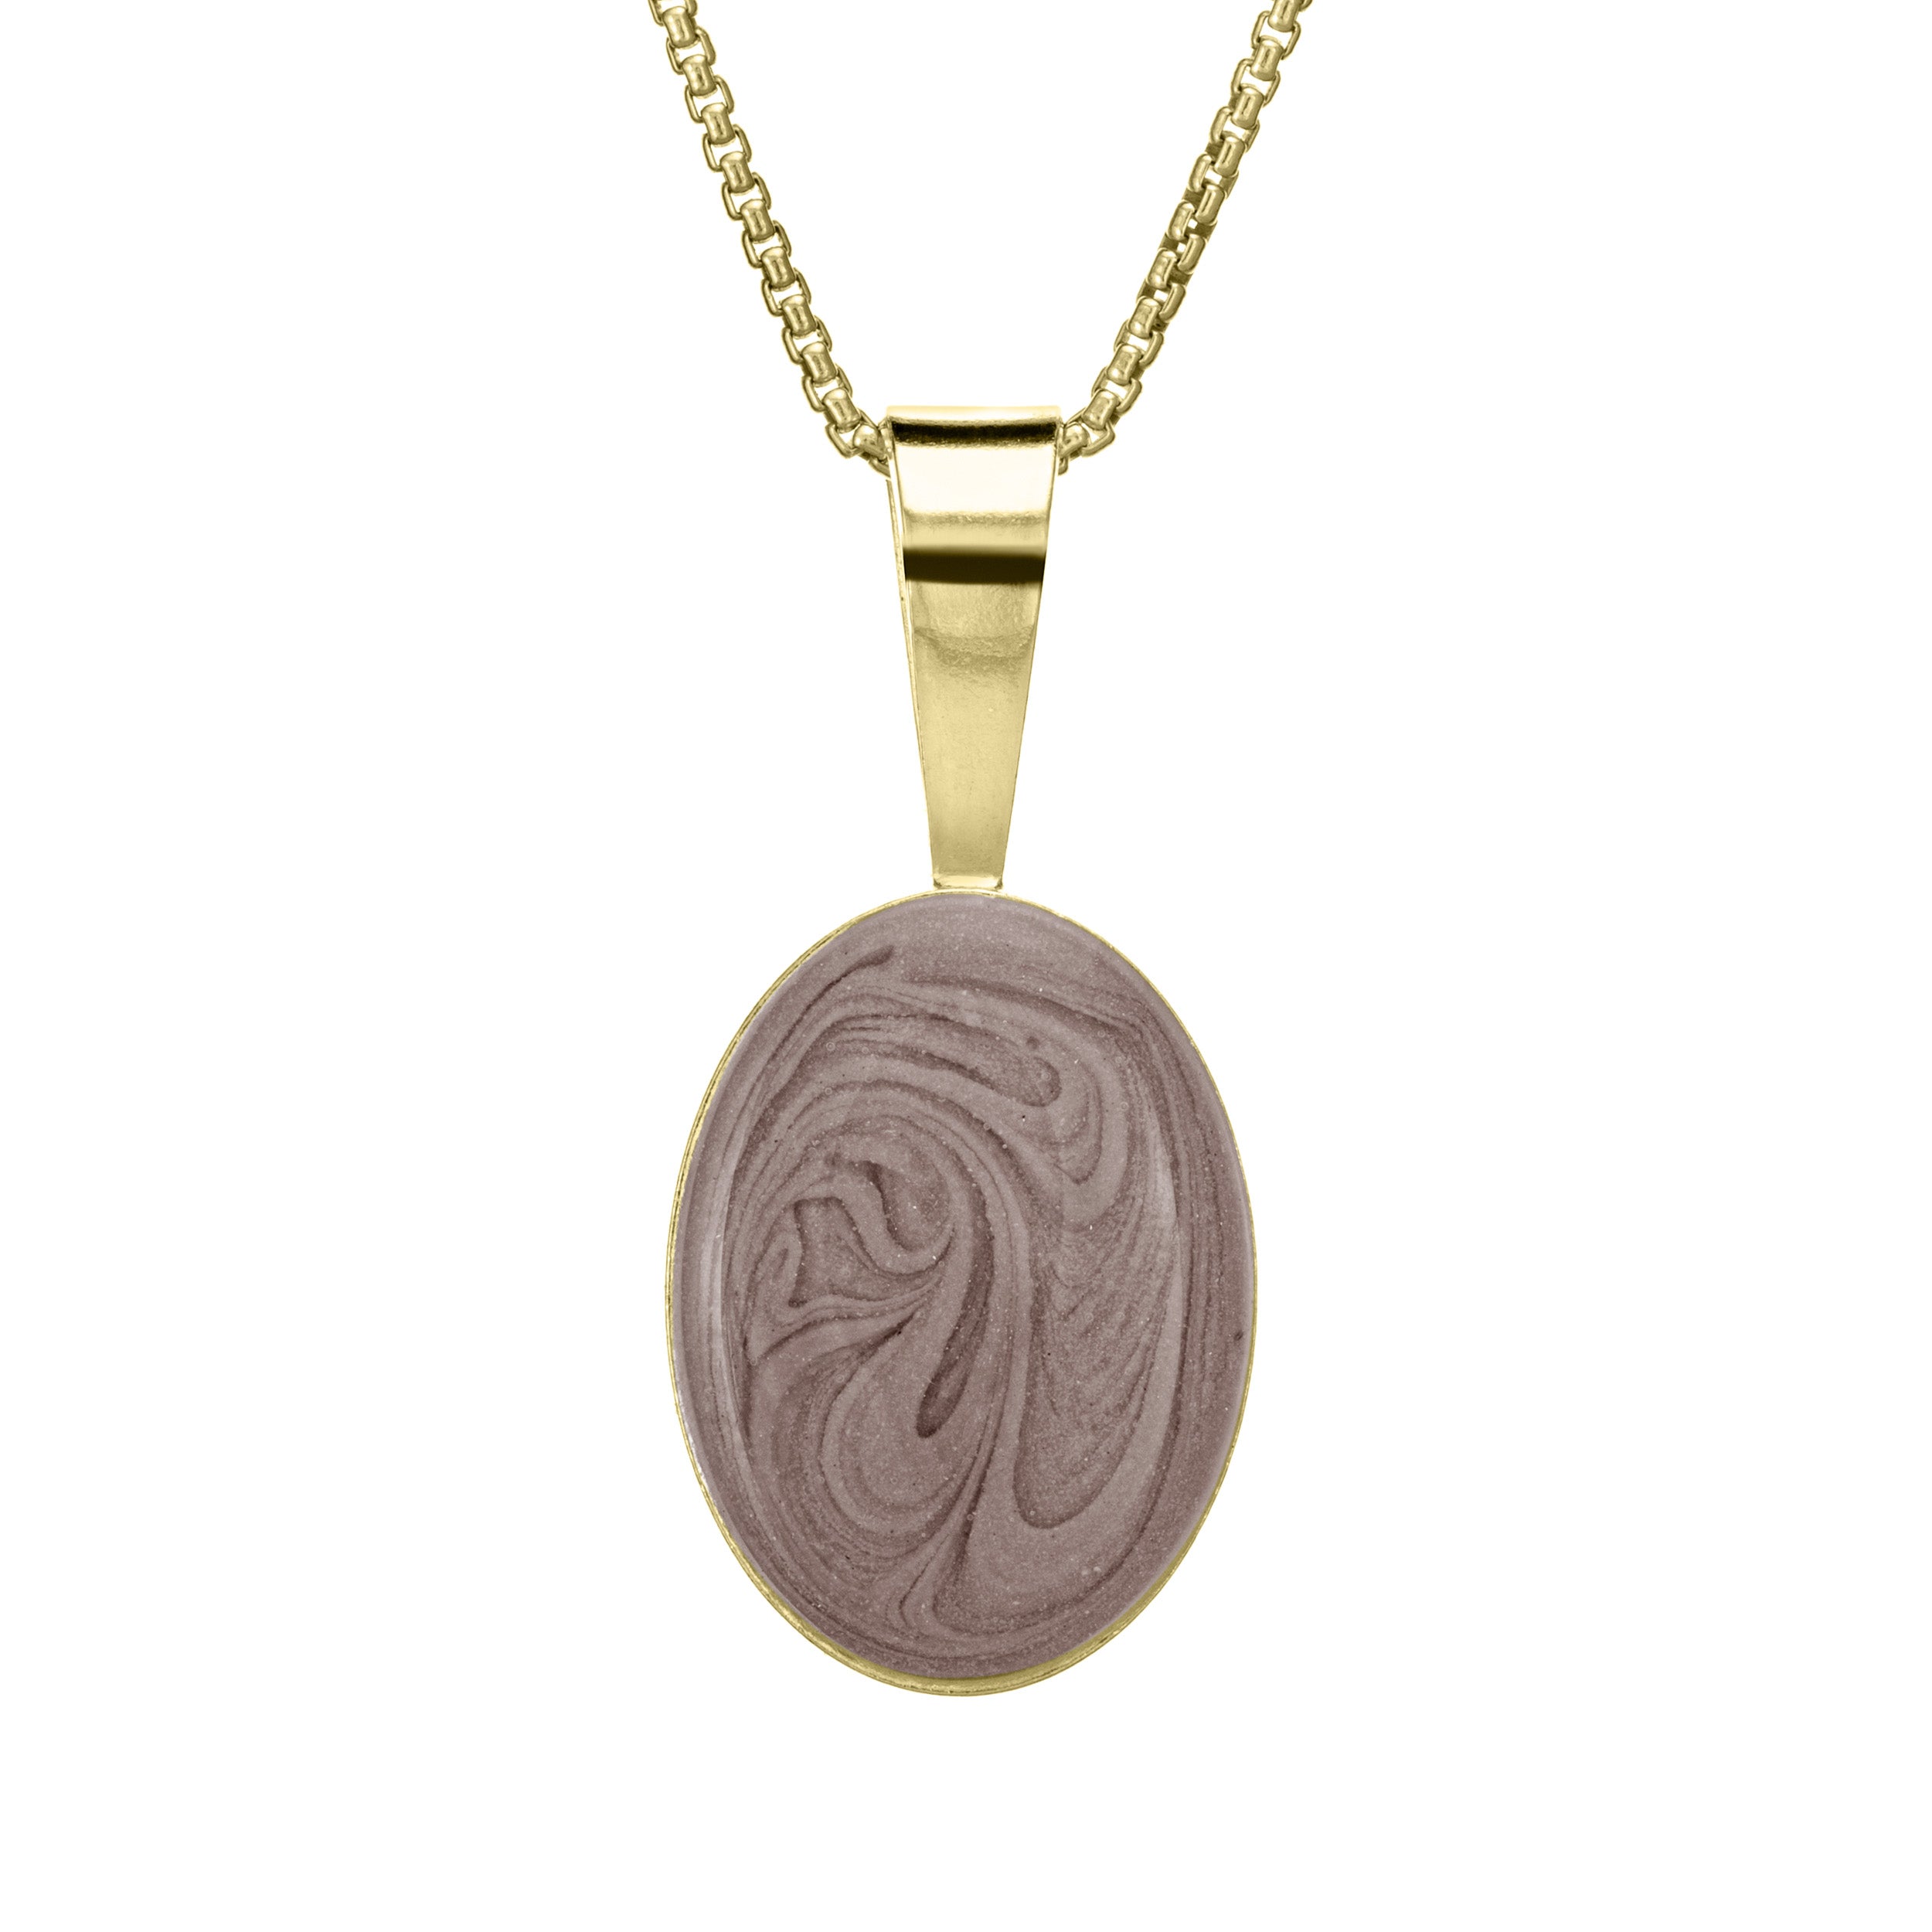 Solid 14K Gold Cremation Jewelry Pendants & Necklaces